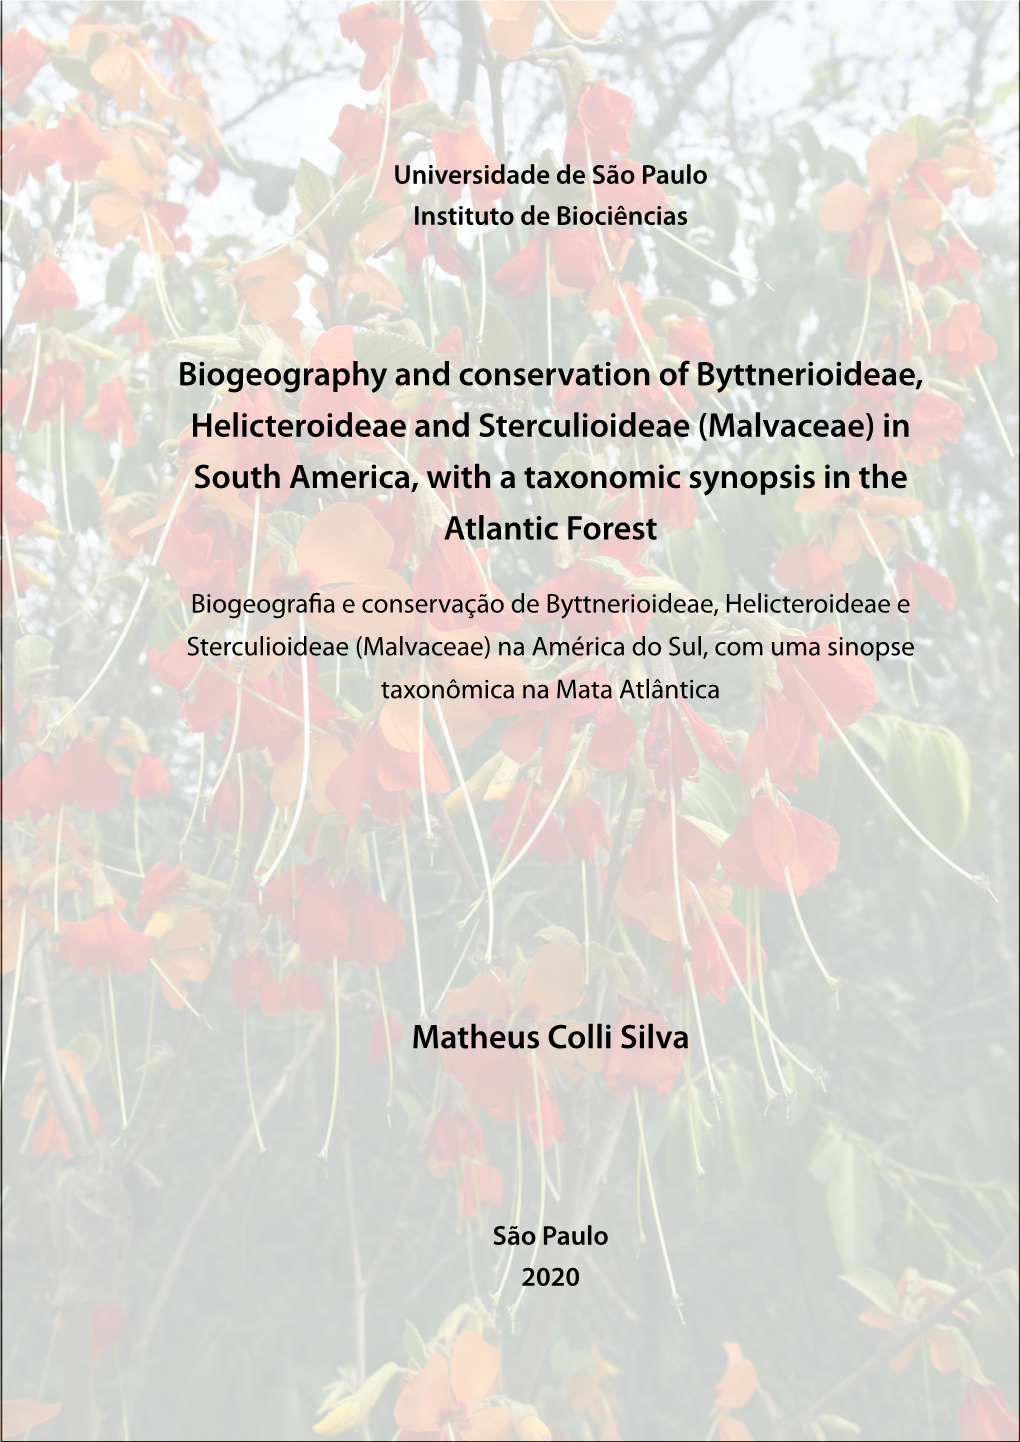 Malvaceae) in South America, with a Taxonomic Synopsis in the Atlantic Forest